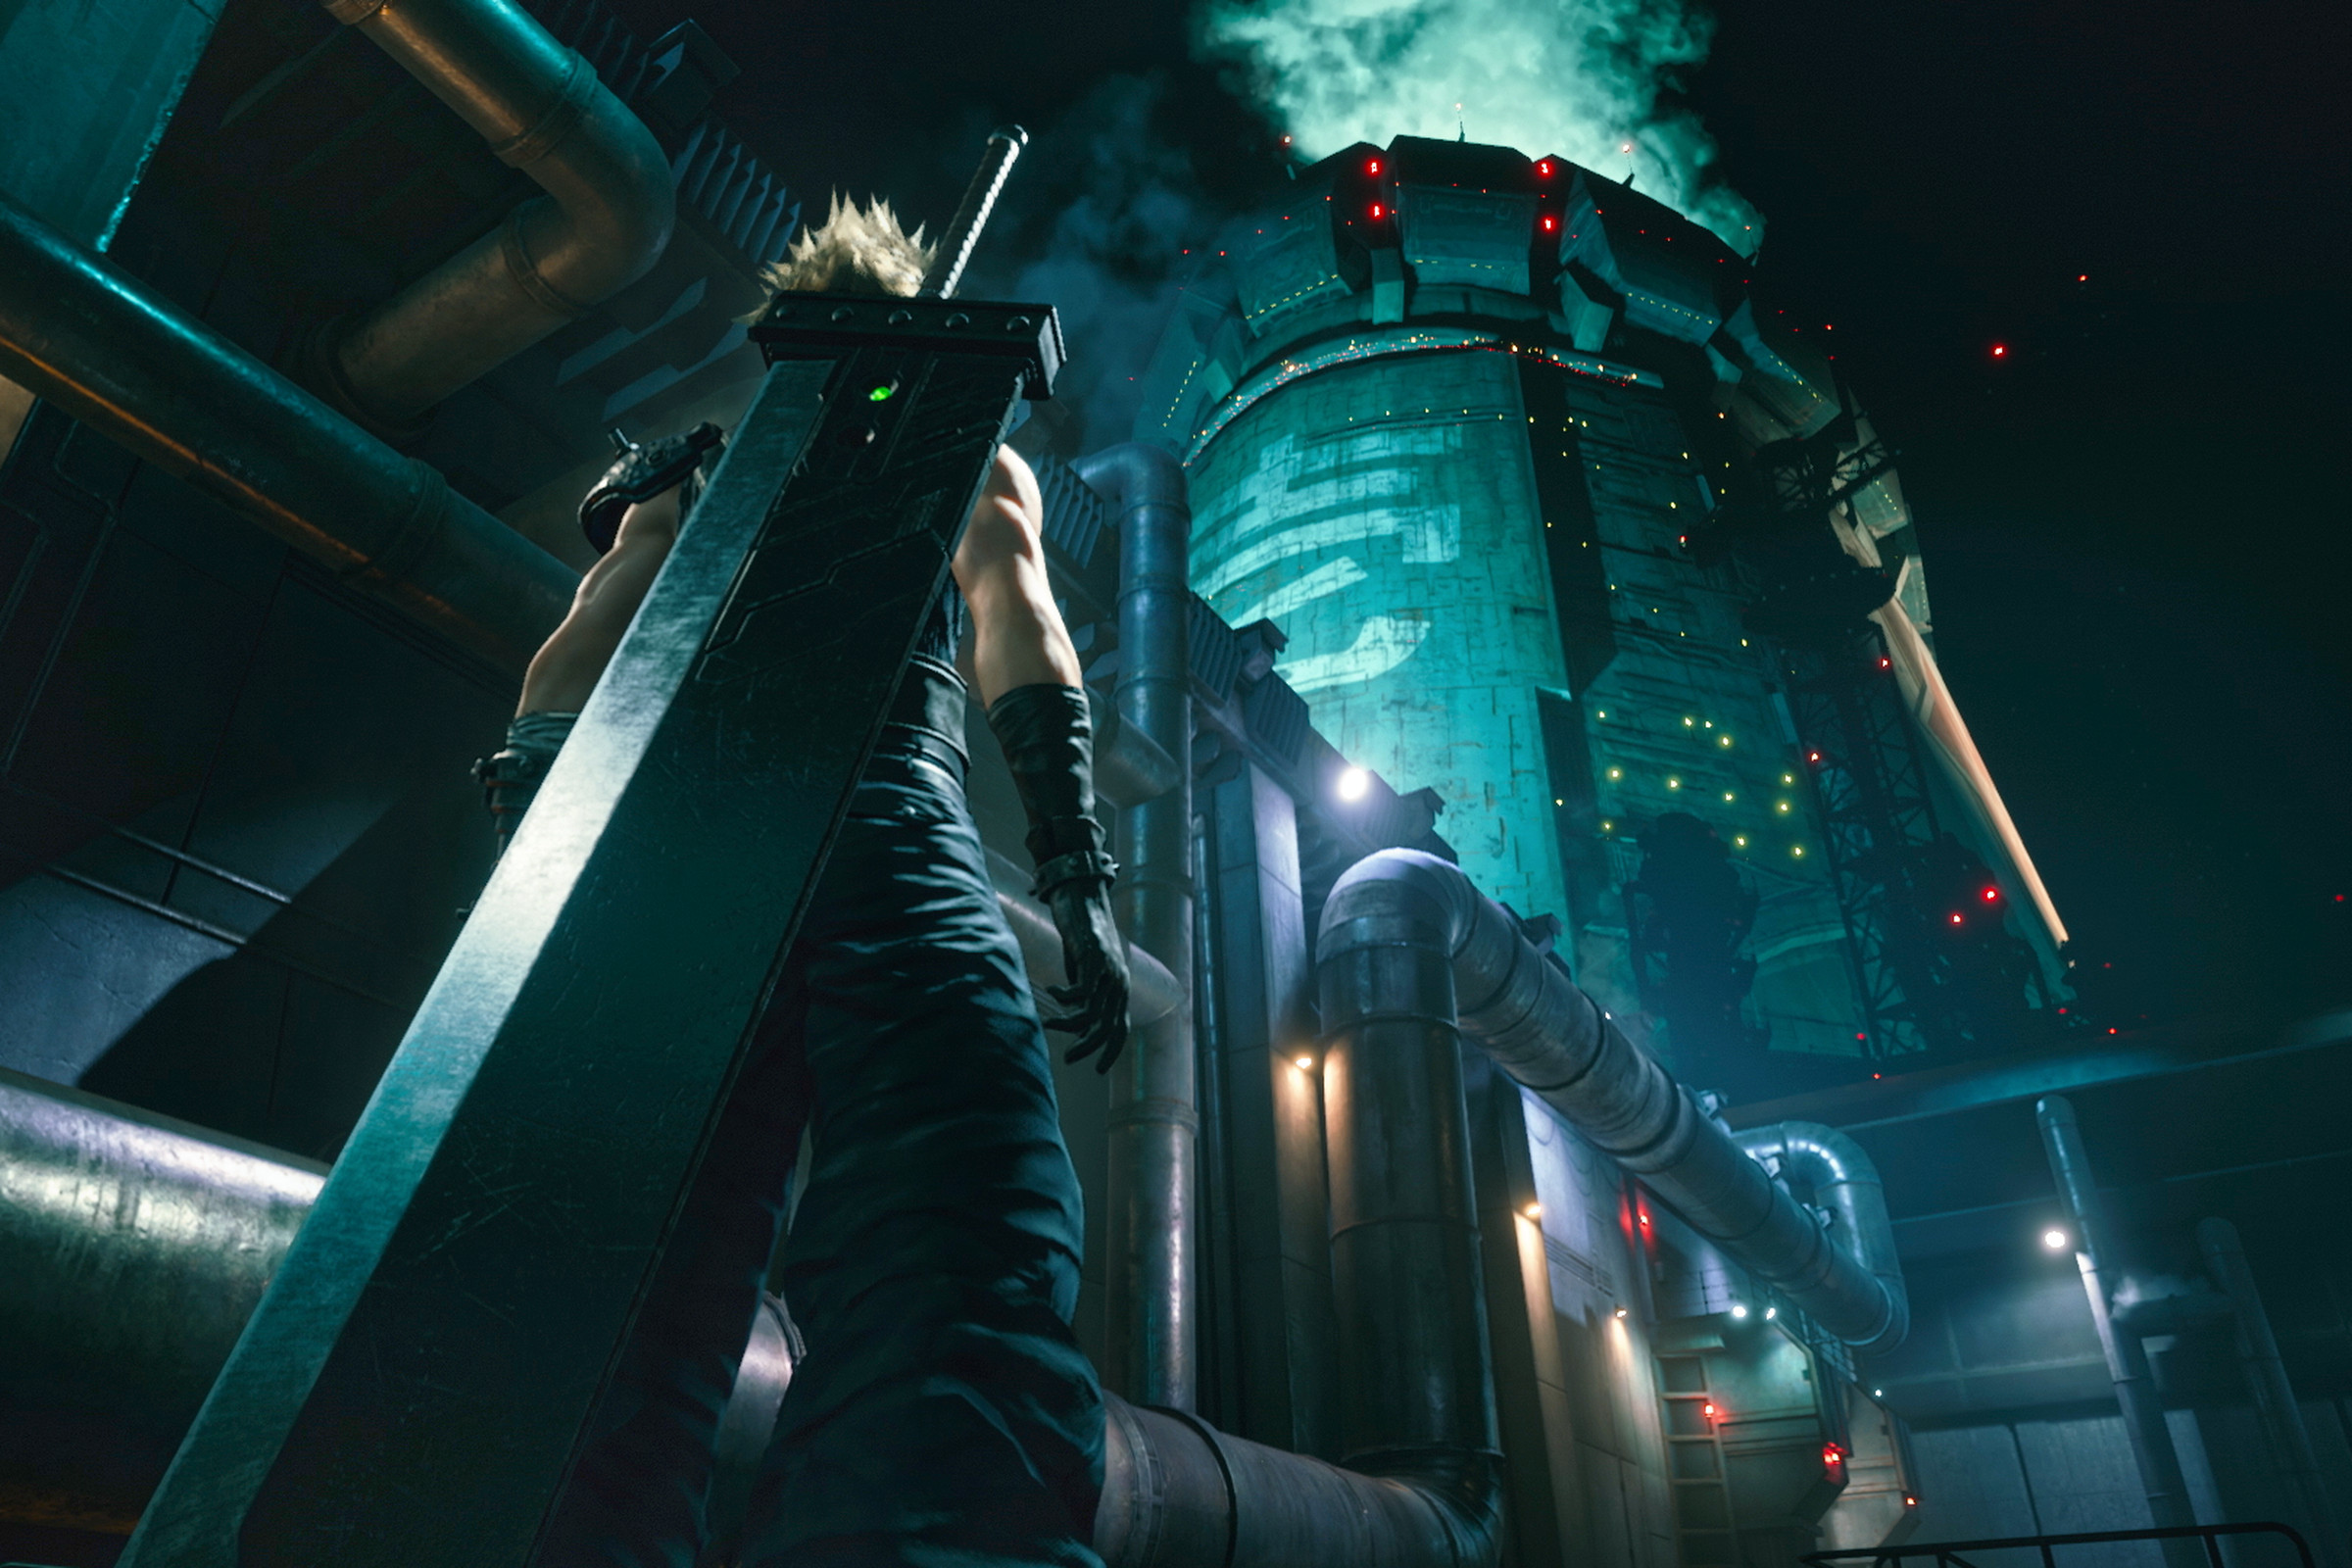 Final Fantasy VII Remake Intergrade is coming to the Epic Games Store.